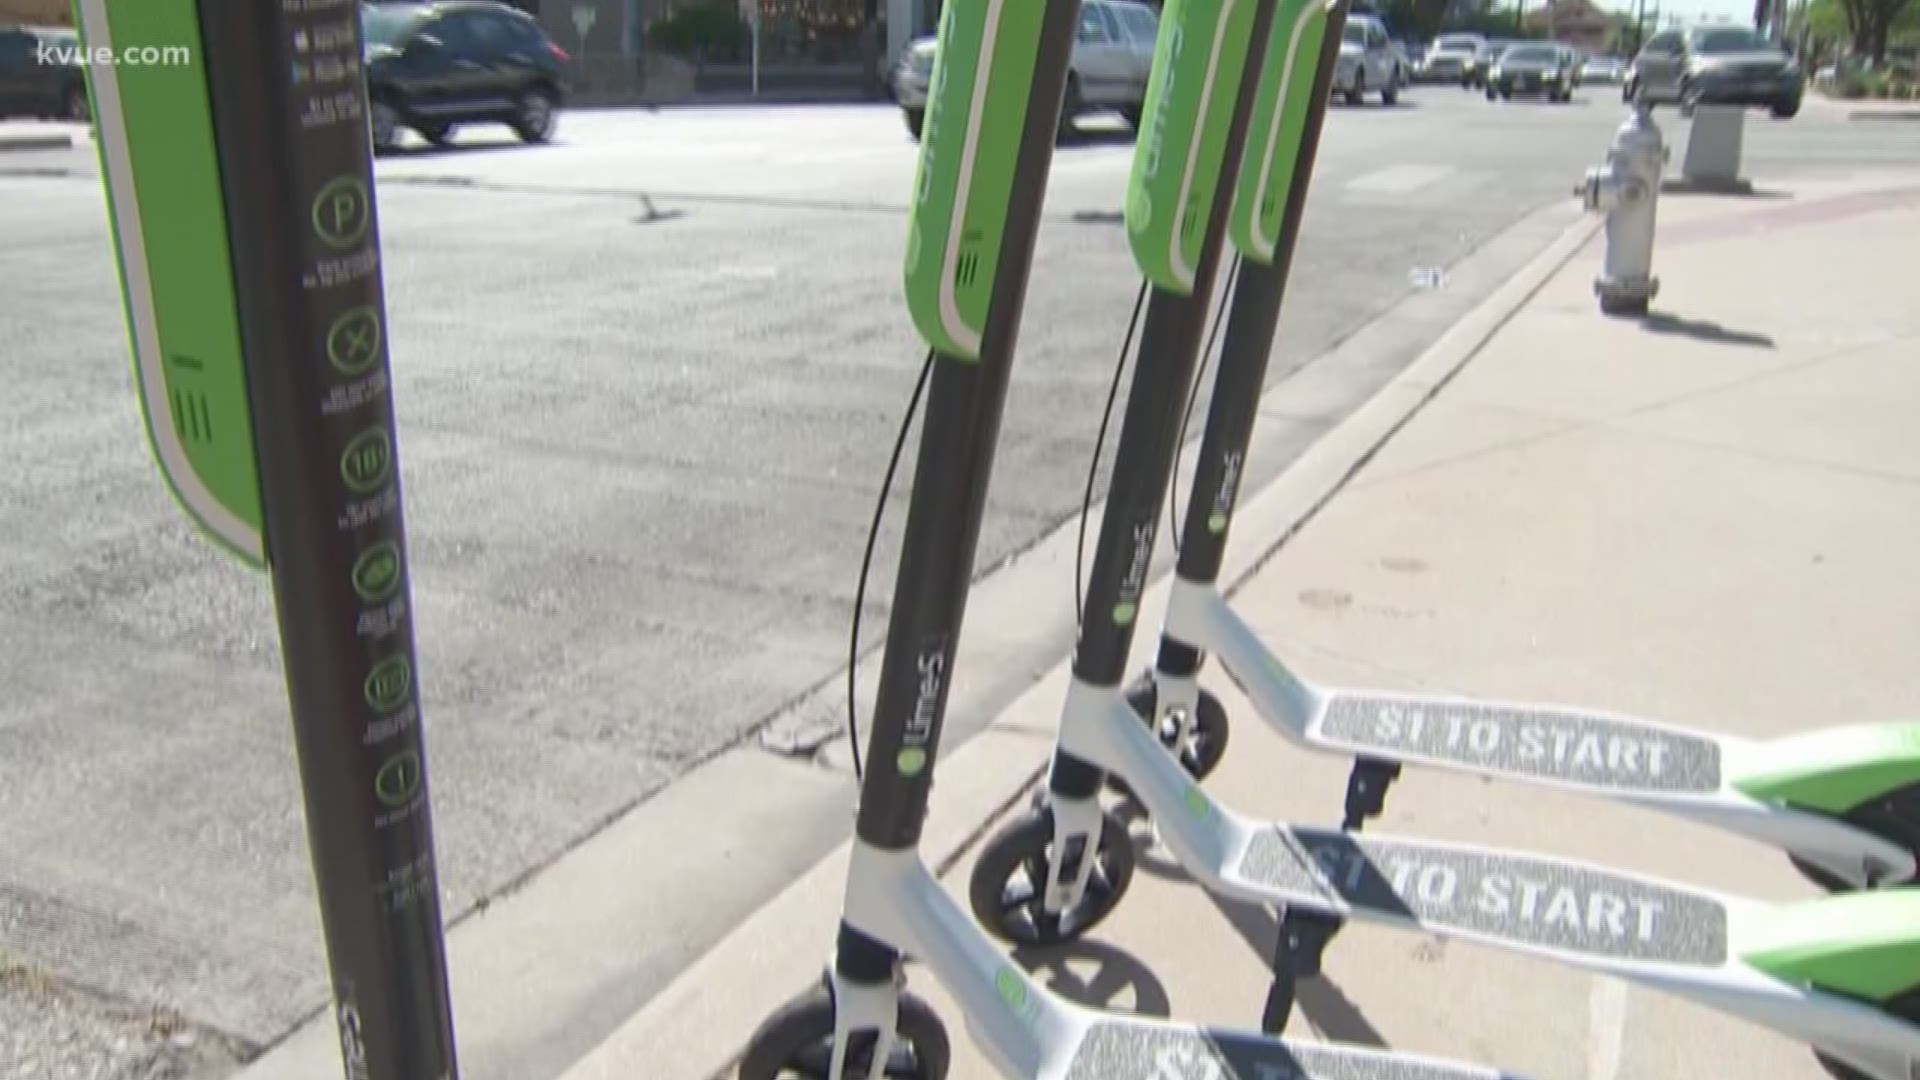 You're able to find these scooters all over Downtown Austin, but the problem is that no one got the city's permission to put them there.